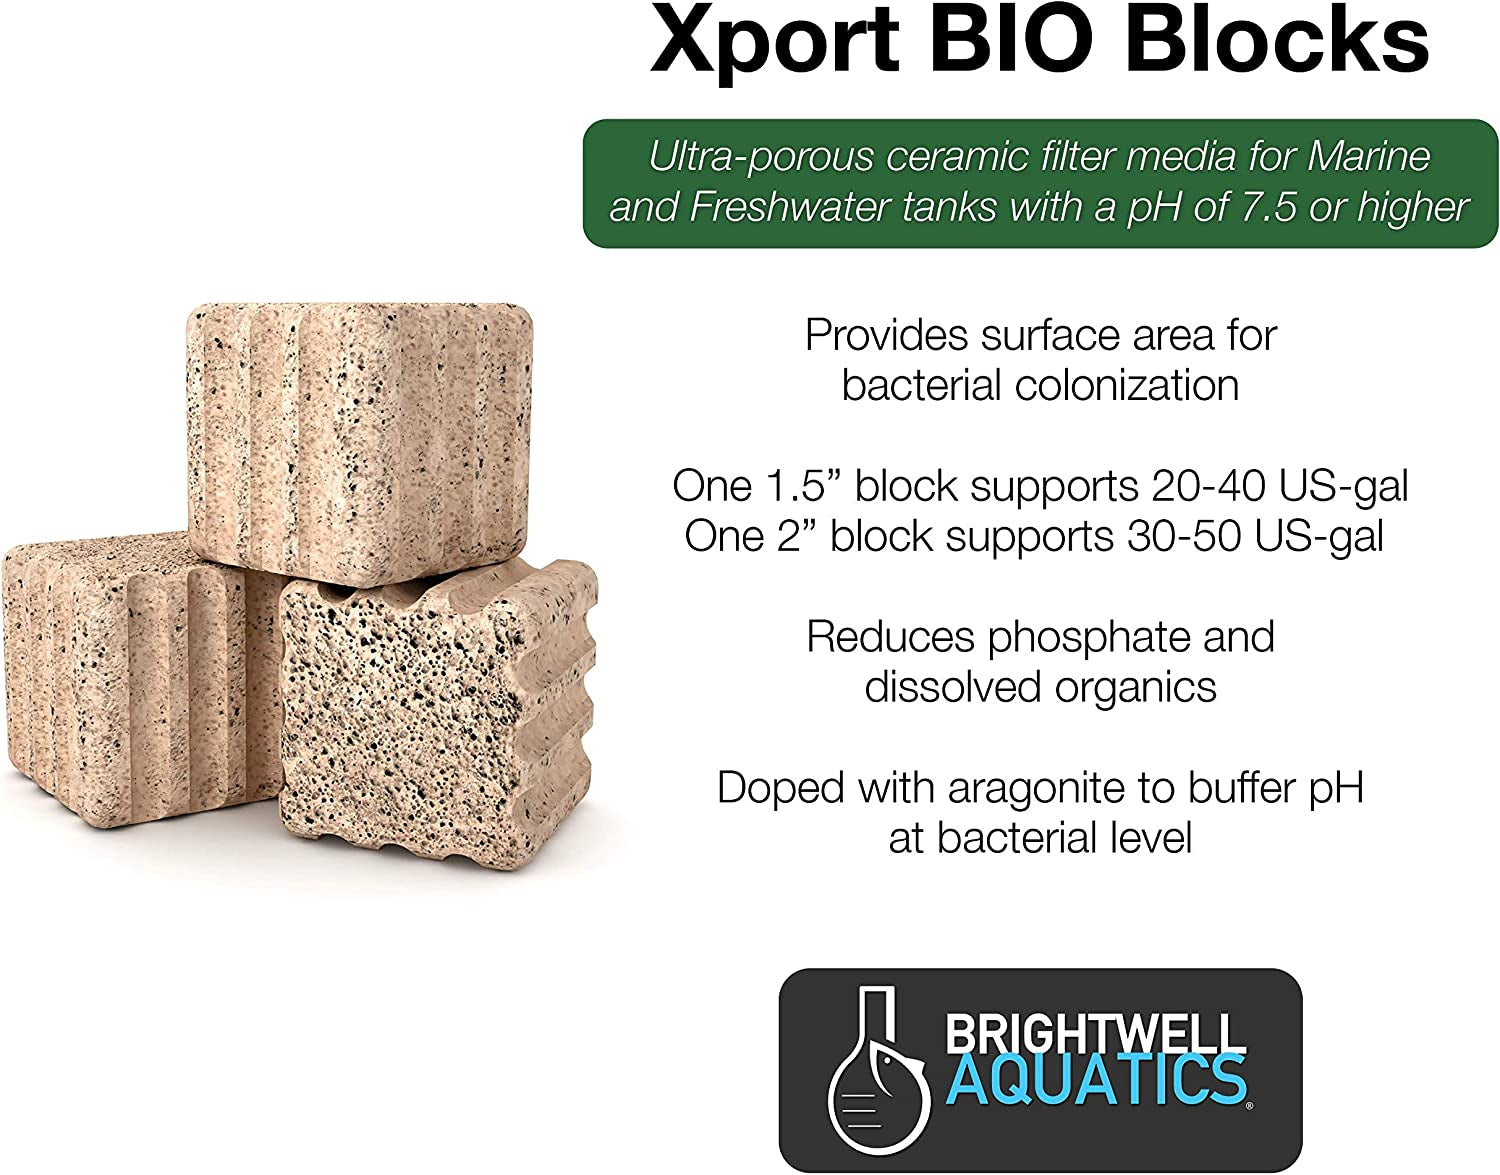 Xport-Bio Block - Biological Filtration Mediafor Bacteria Growth and Phosphate Reduction (Xpblockbio2.0In-3Pk)